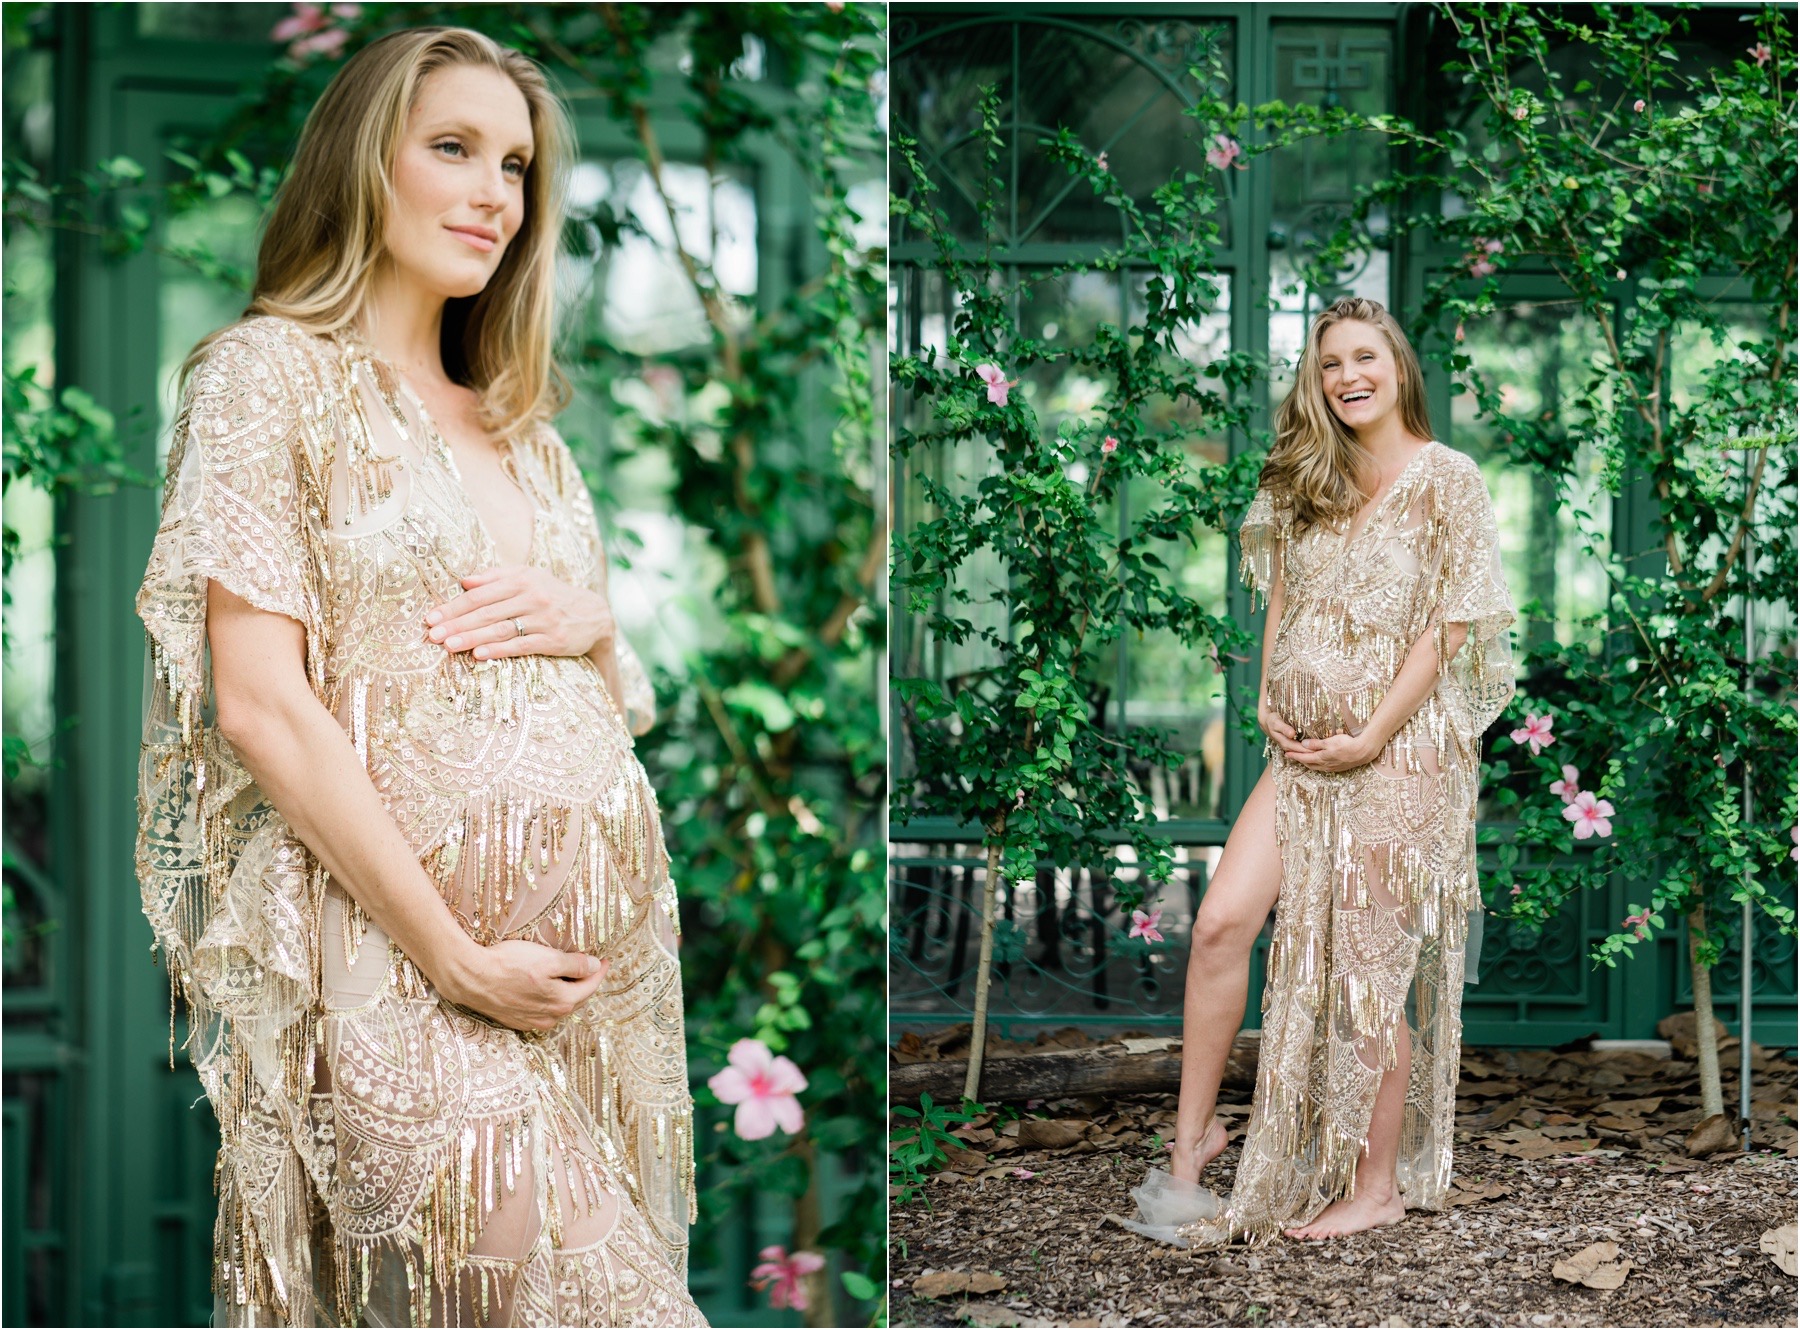 Maternity Session at the Wonder Gardens